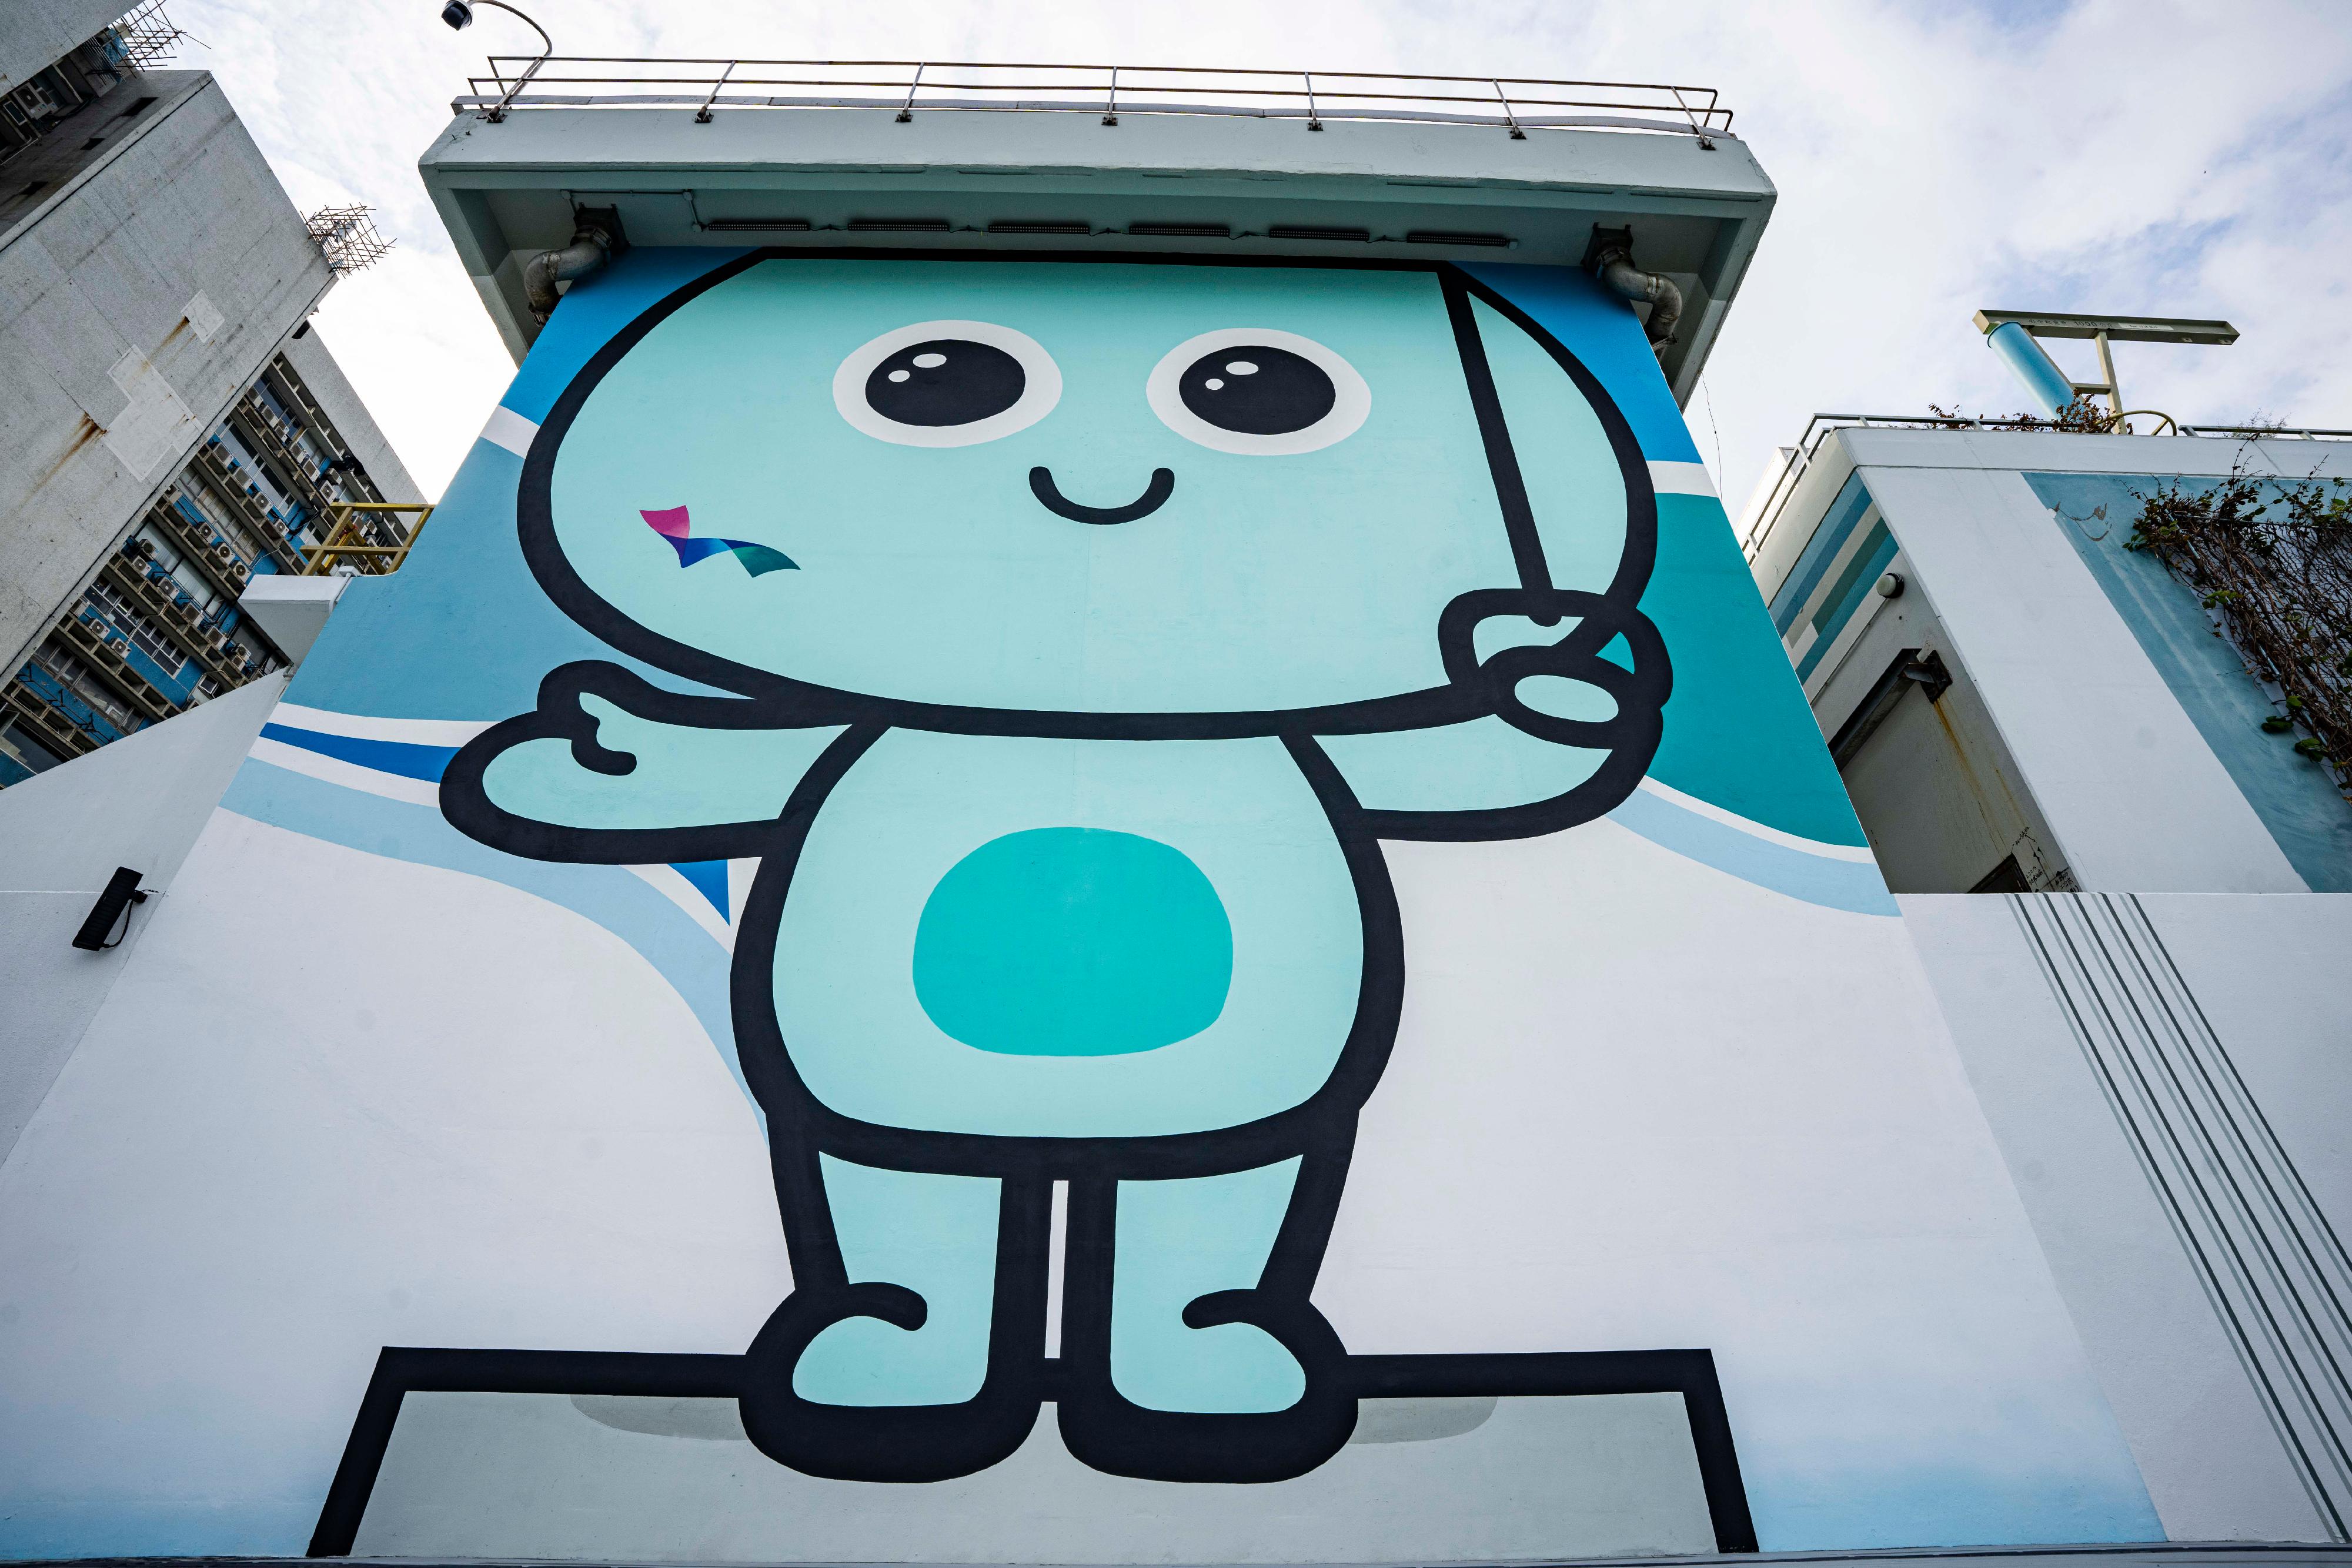 The To Kwa Wan Promenade is open for public use from today (December 21). Photo shows the mural of the Drainage Services Department's mascot, Drainy.